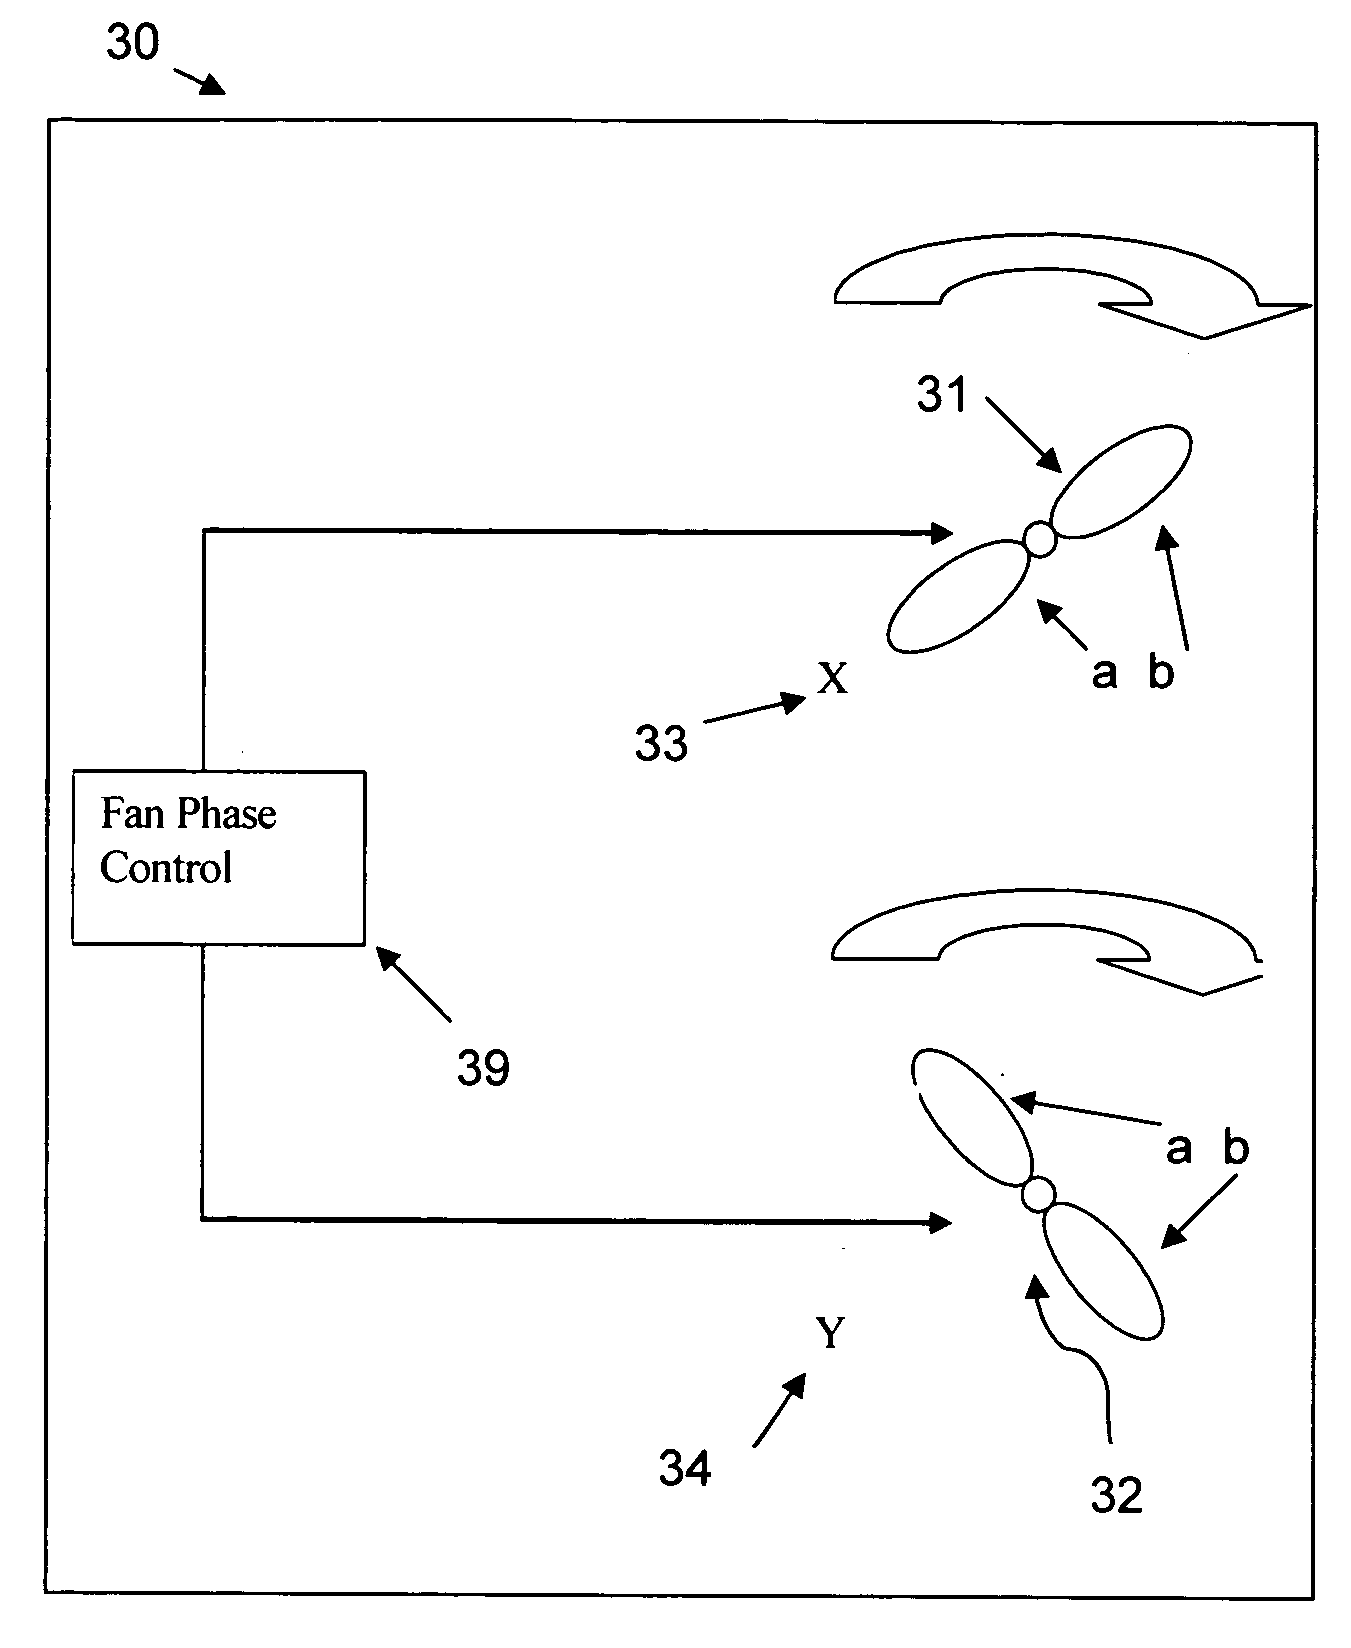 Mutual active cancellation of fan noise and vibration